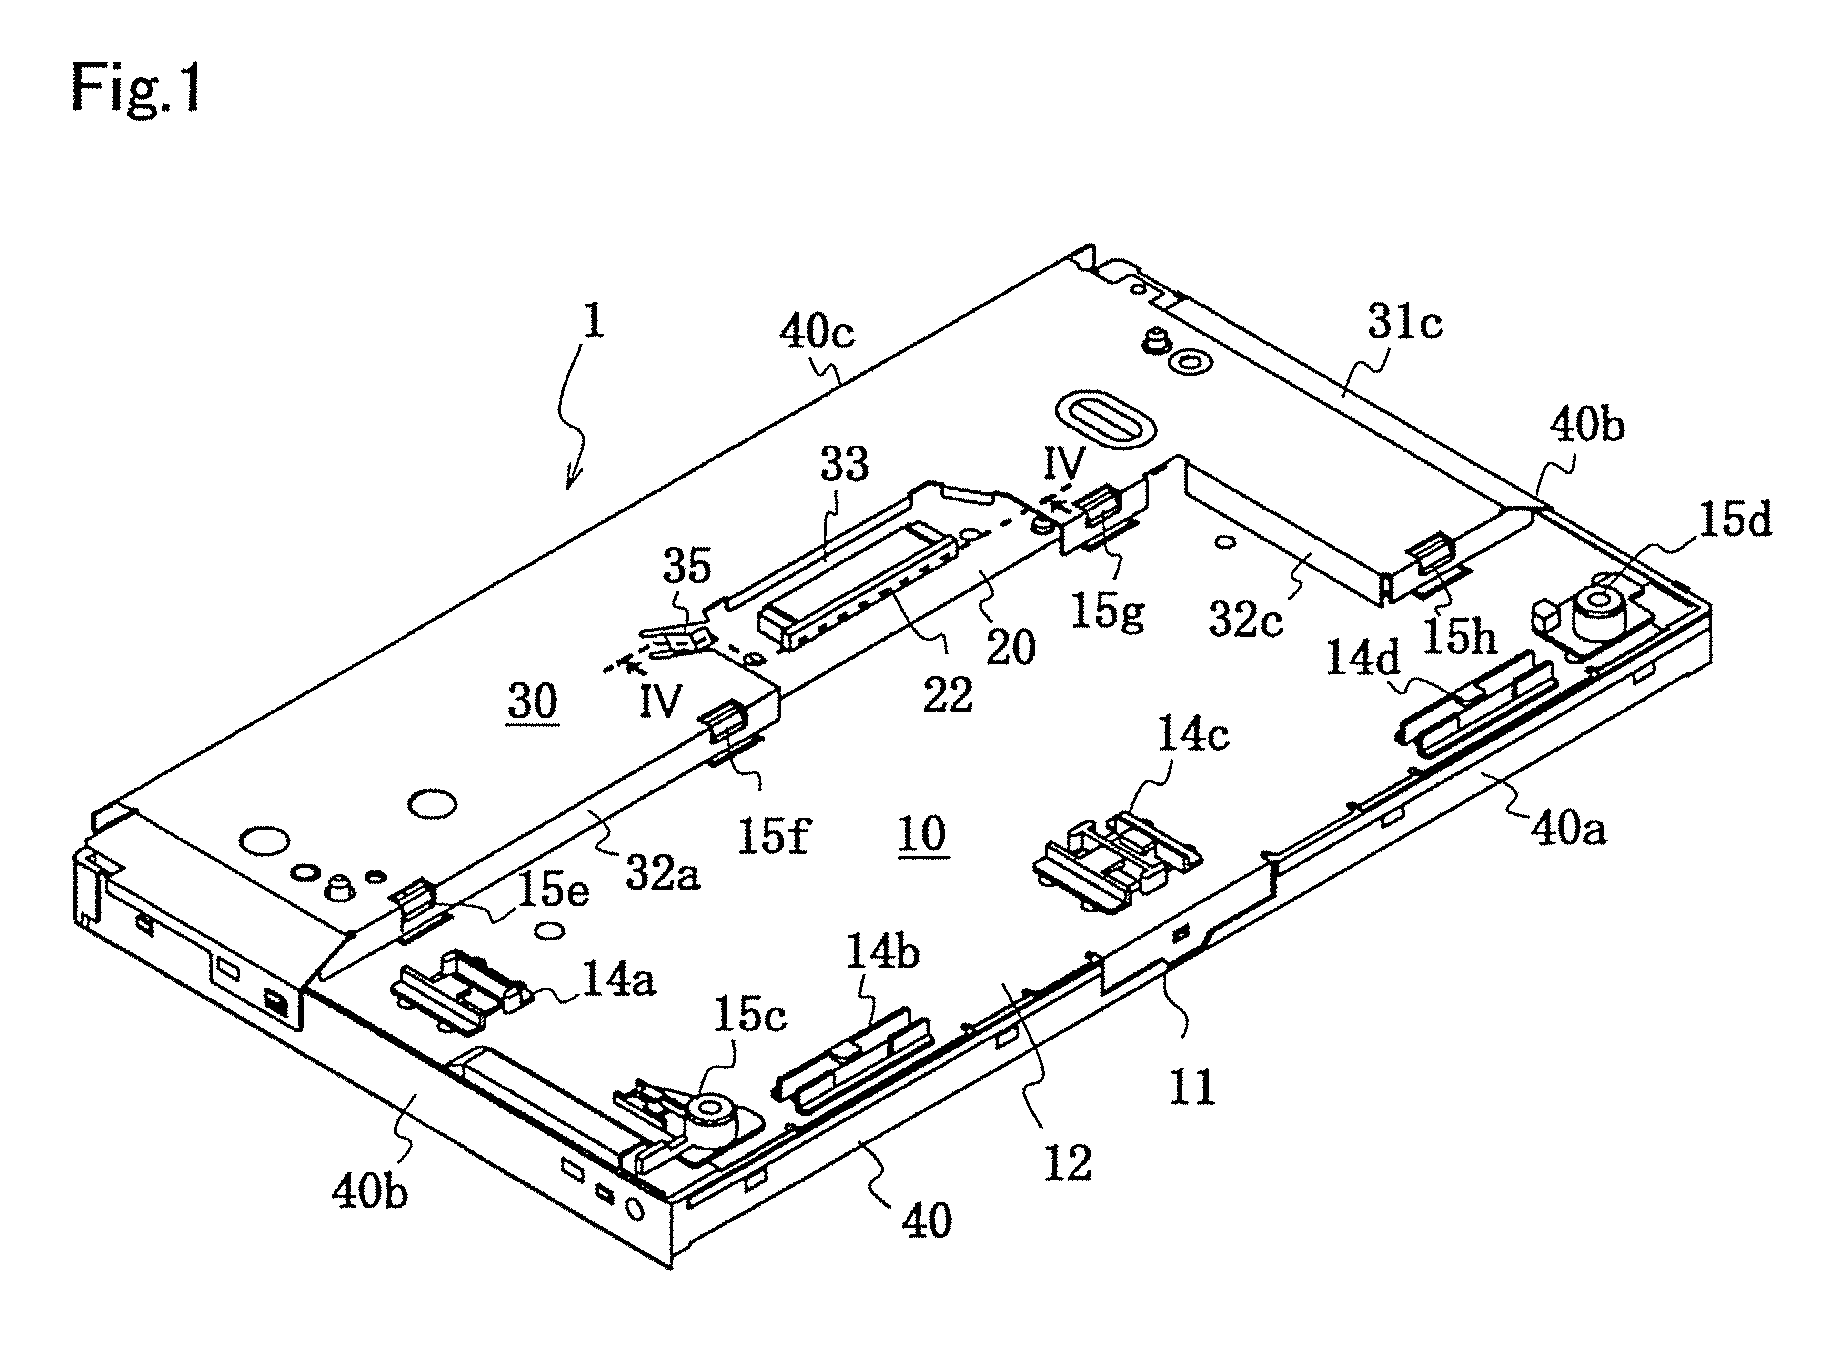 Liquid crystal display with elastic ground contact on first side and multiple ground contacts on second side of drive circuit board